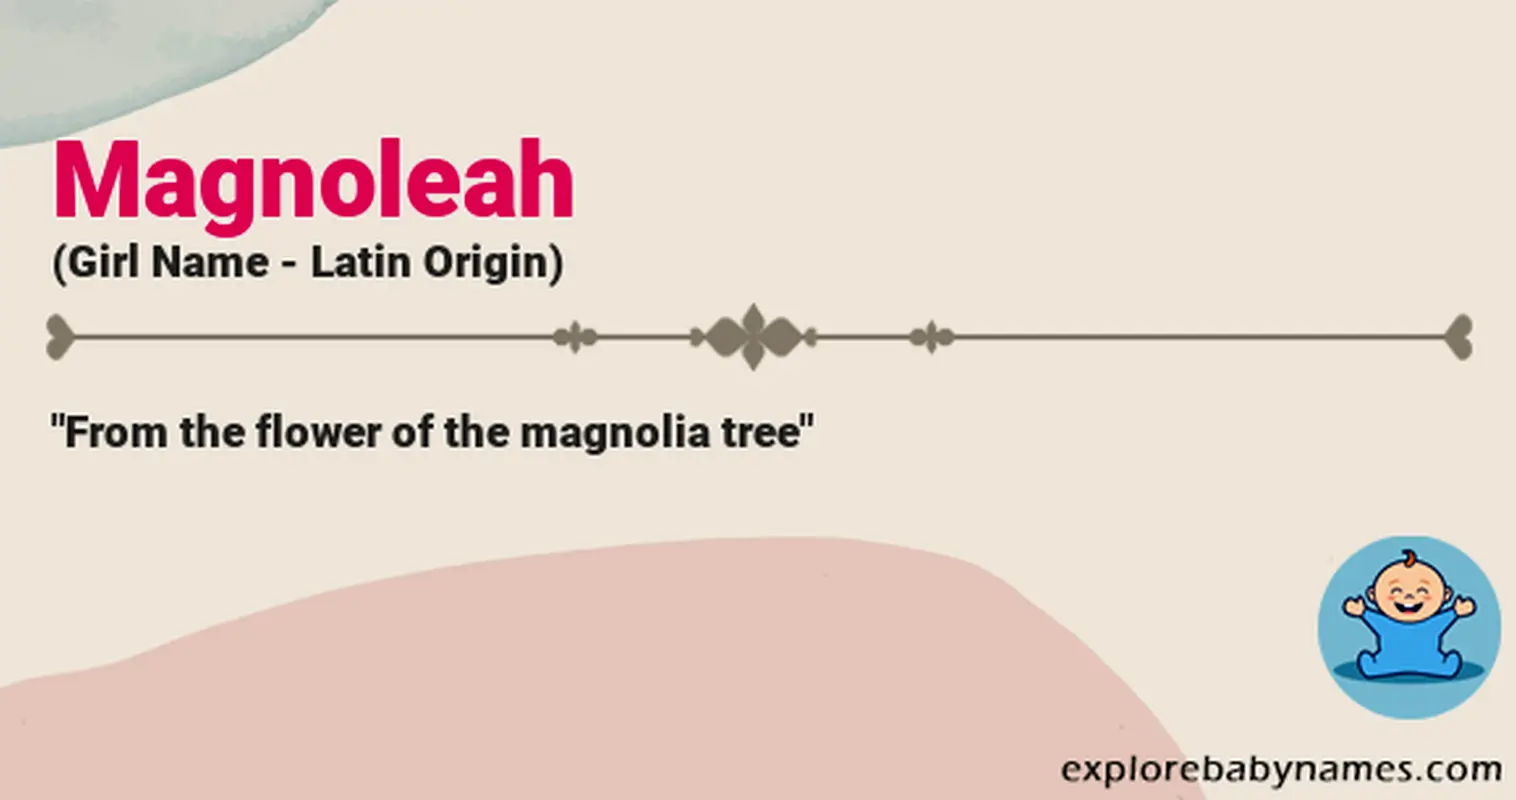 Meaning of Magnoleah